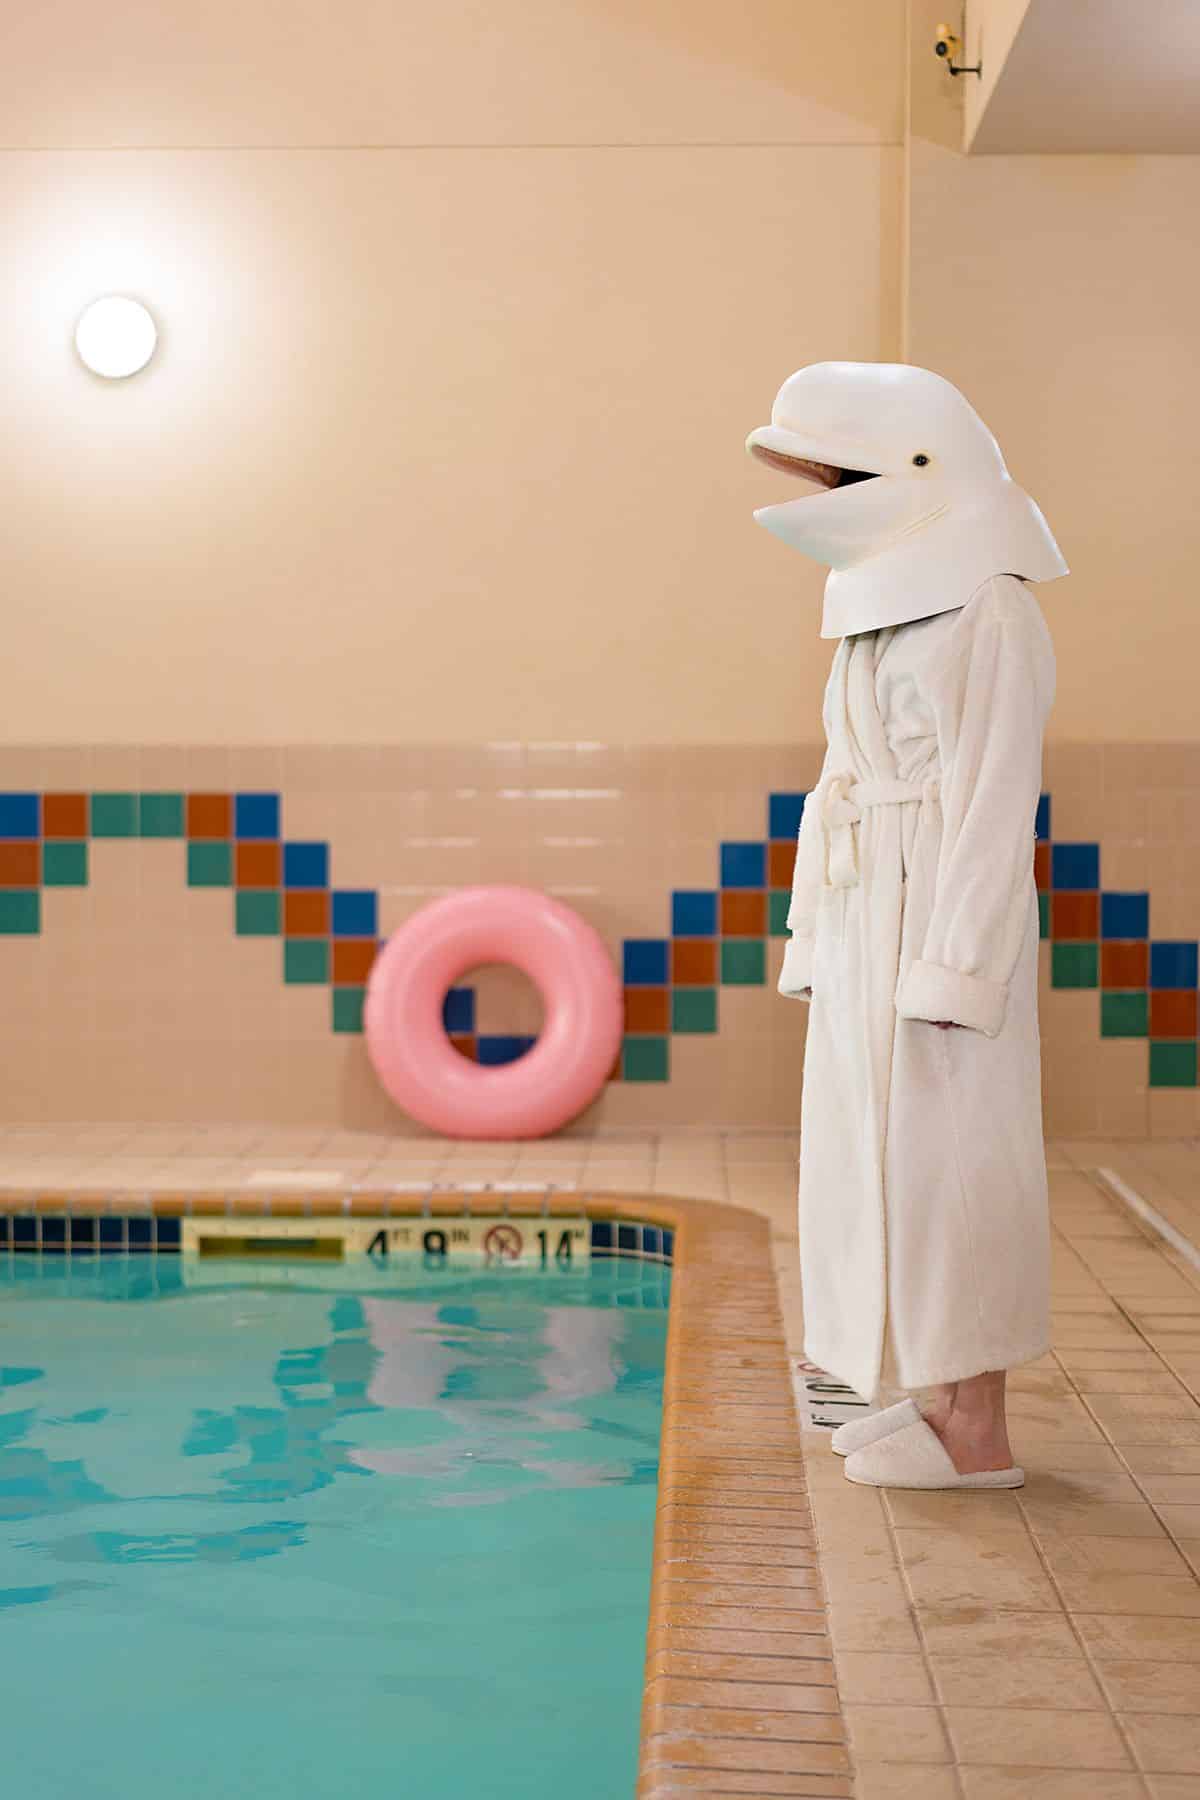 A person standing on the edge of a hotel pool, wearing a white robe and the head of a beluga whale over their head